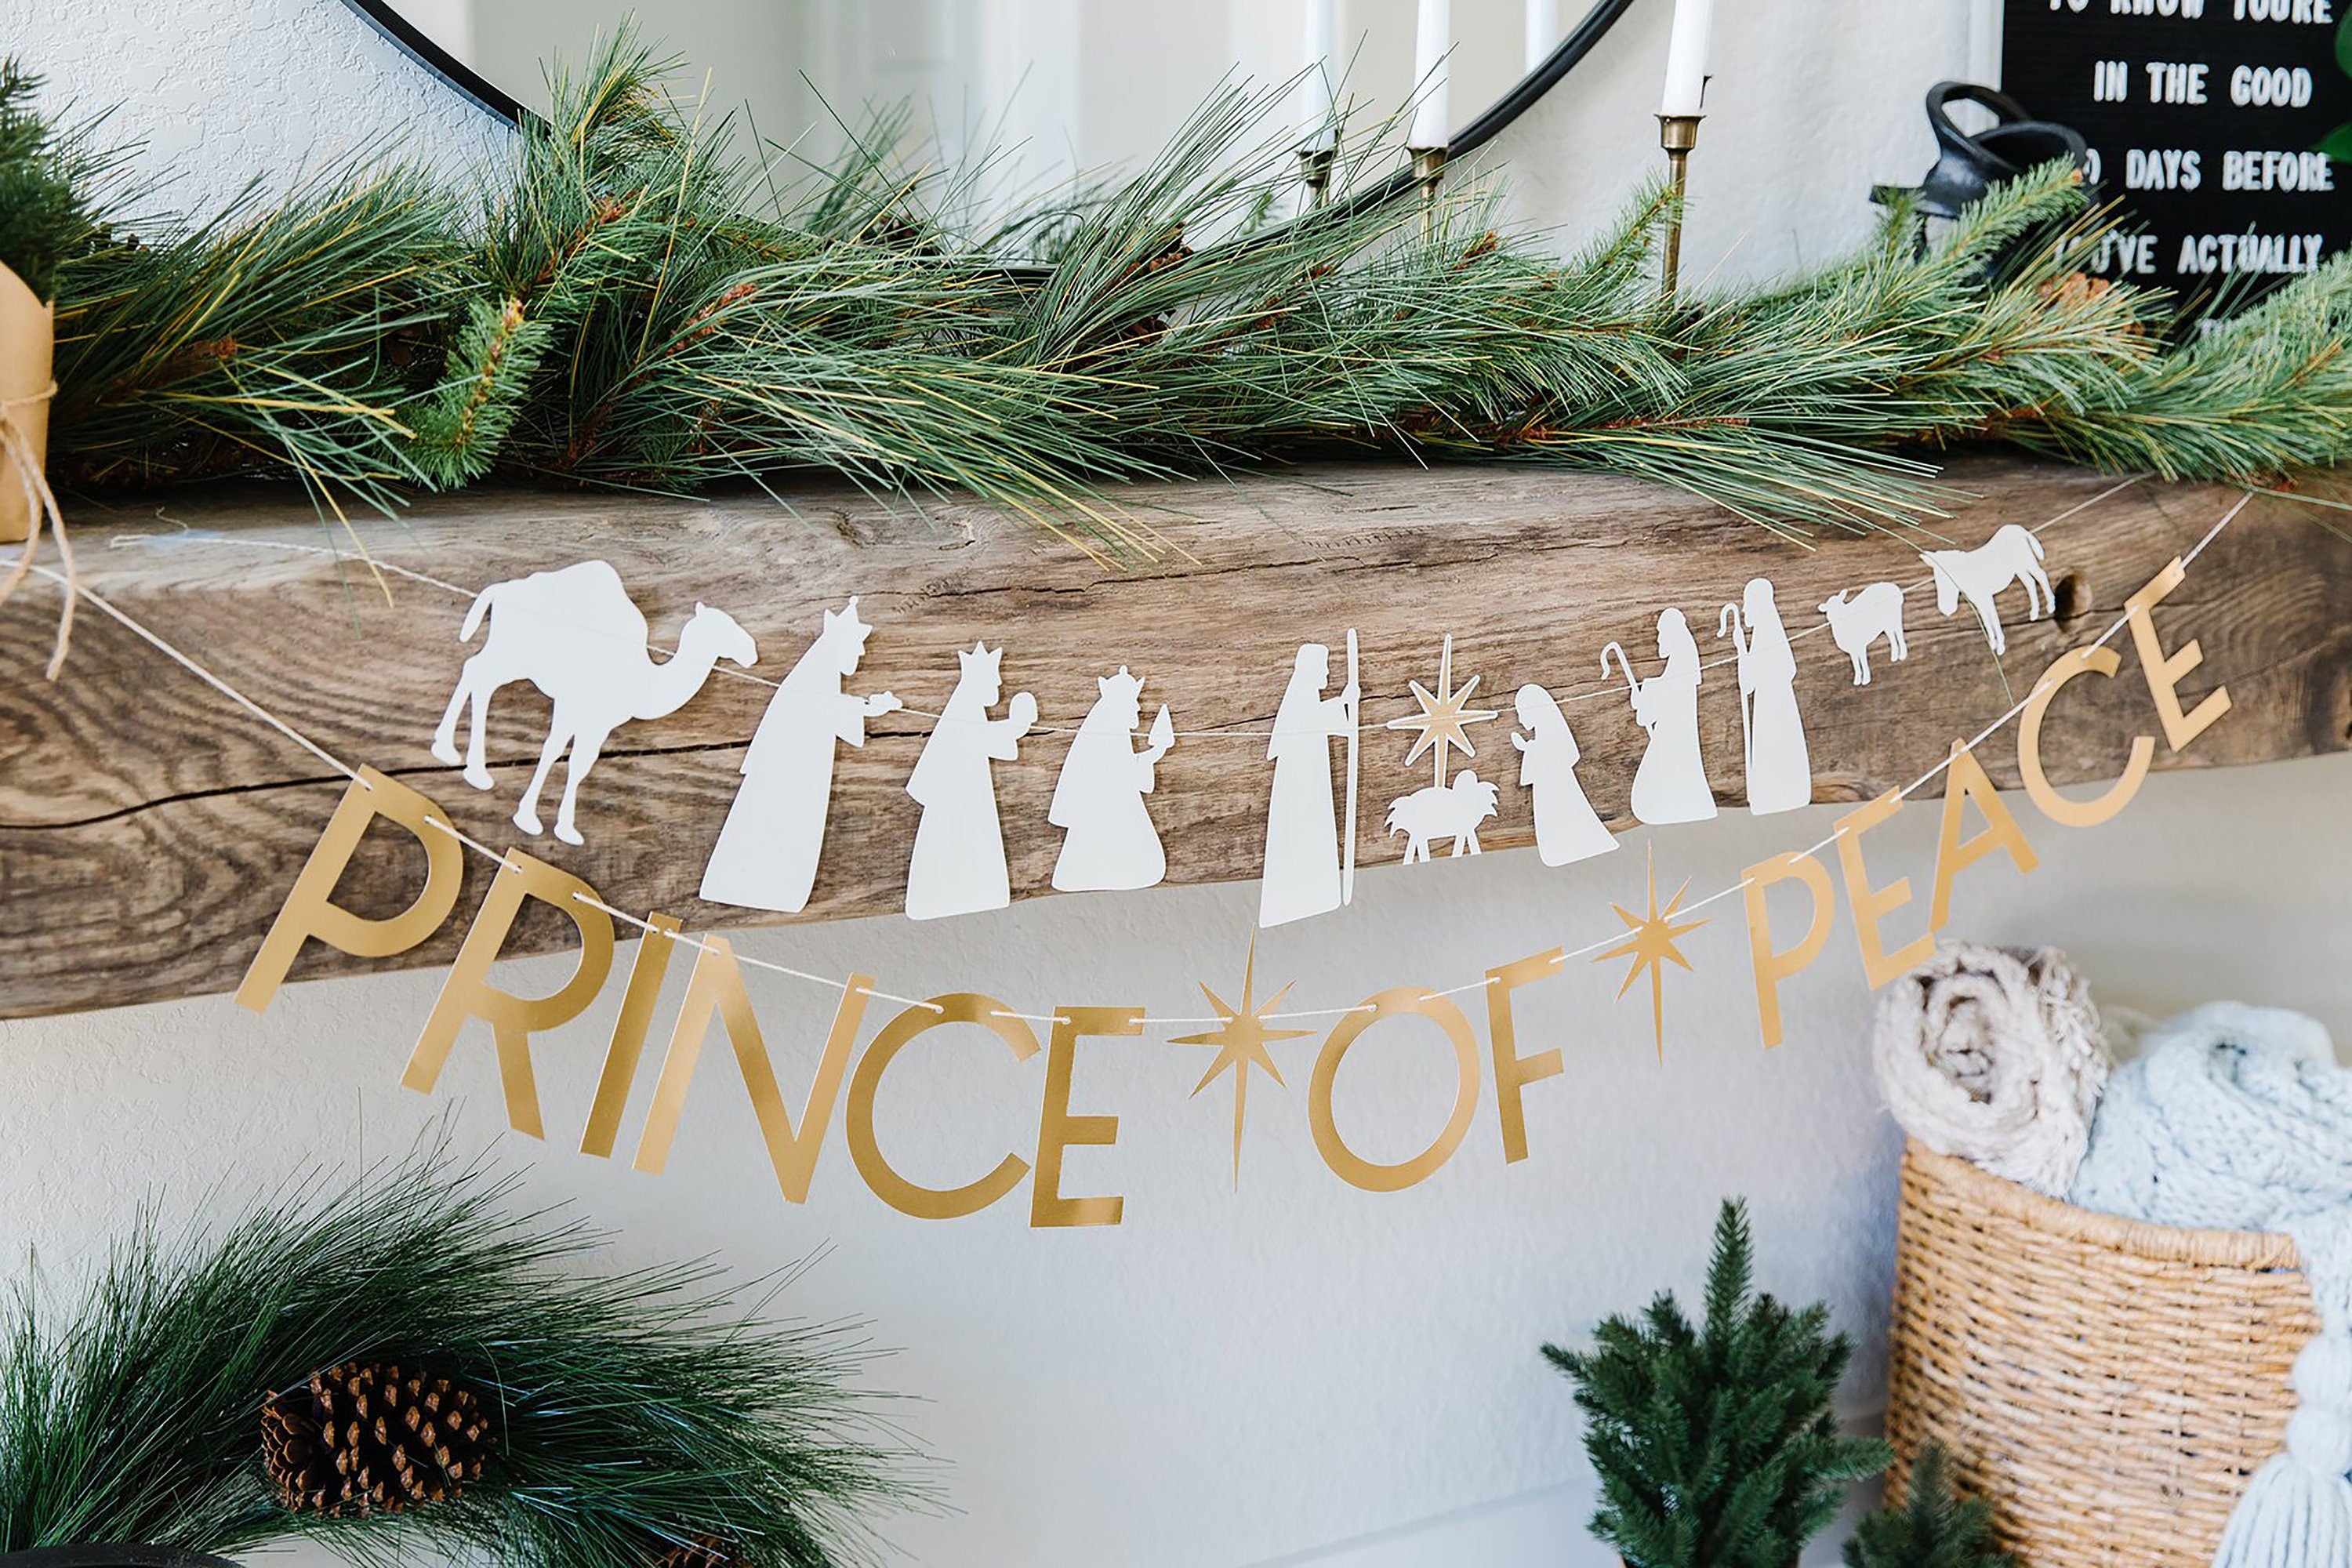 Prince of Peace - Banner | Nativity Decorations - Religious Christmas Decoration - Christian Christmas Decoration - Christmas Nativity Decor